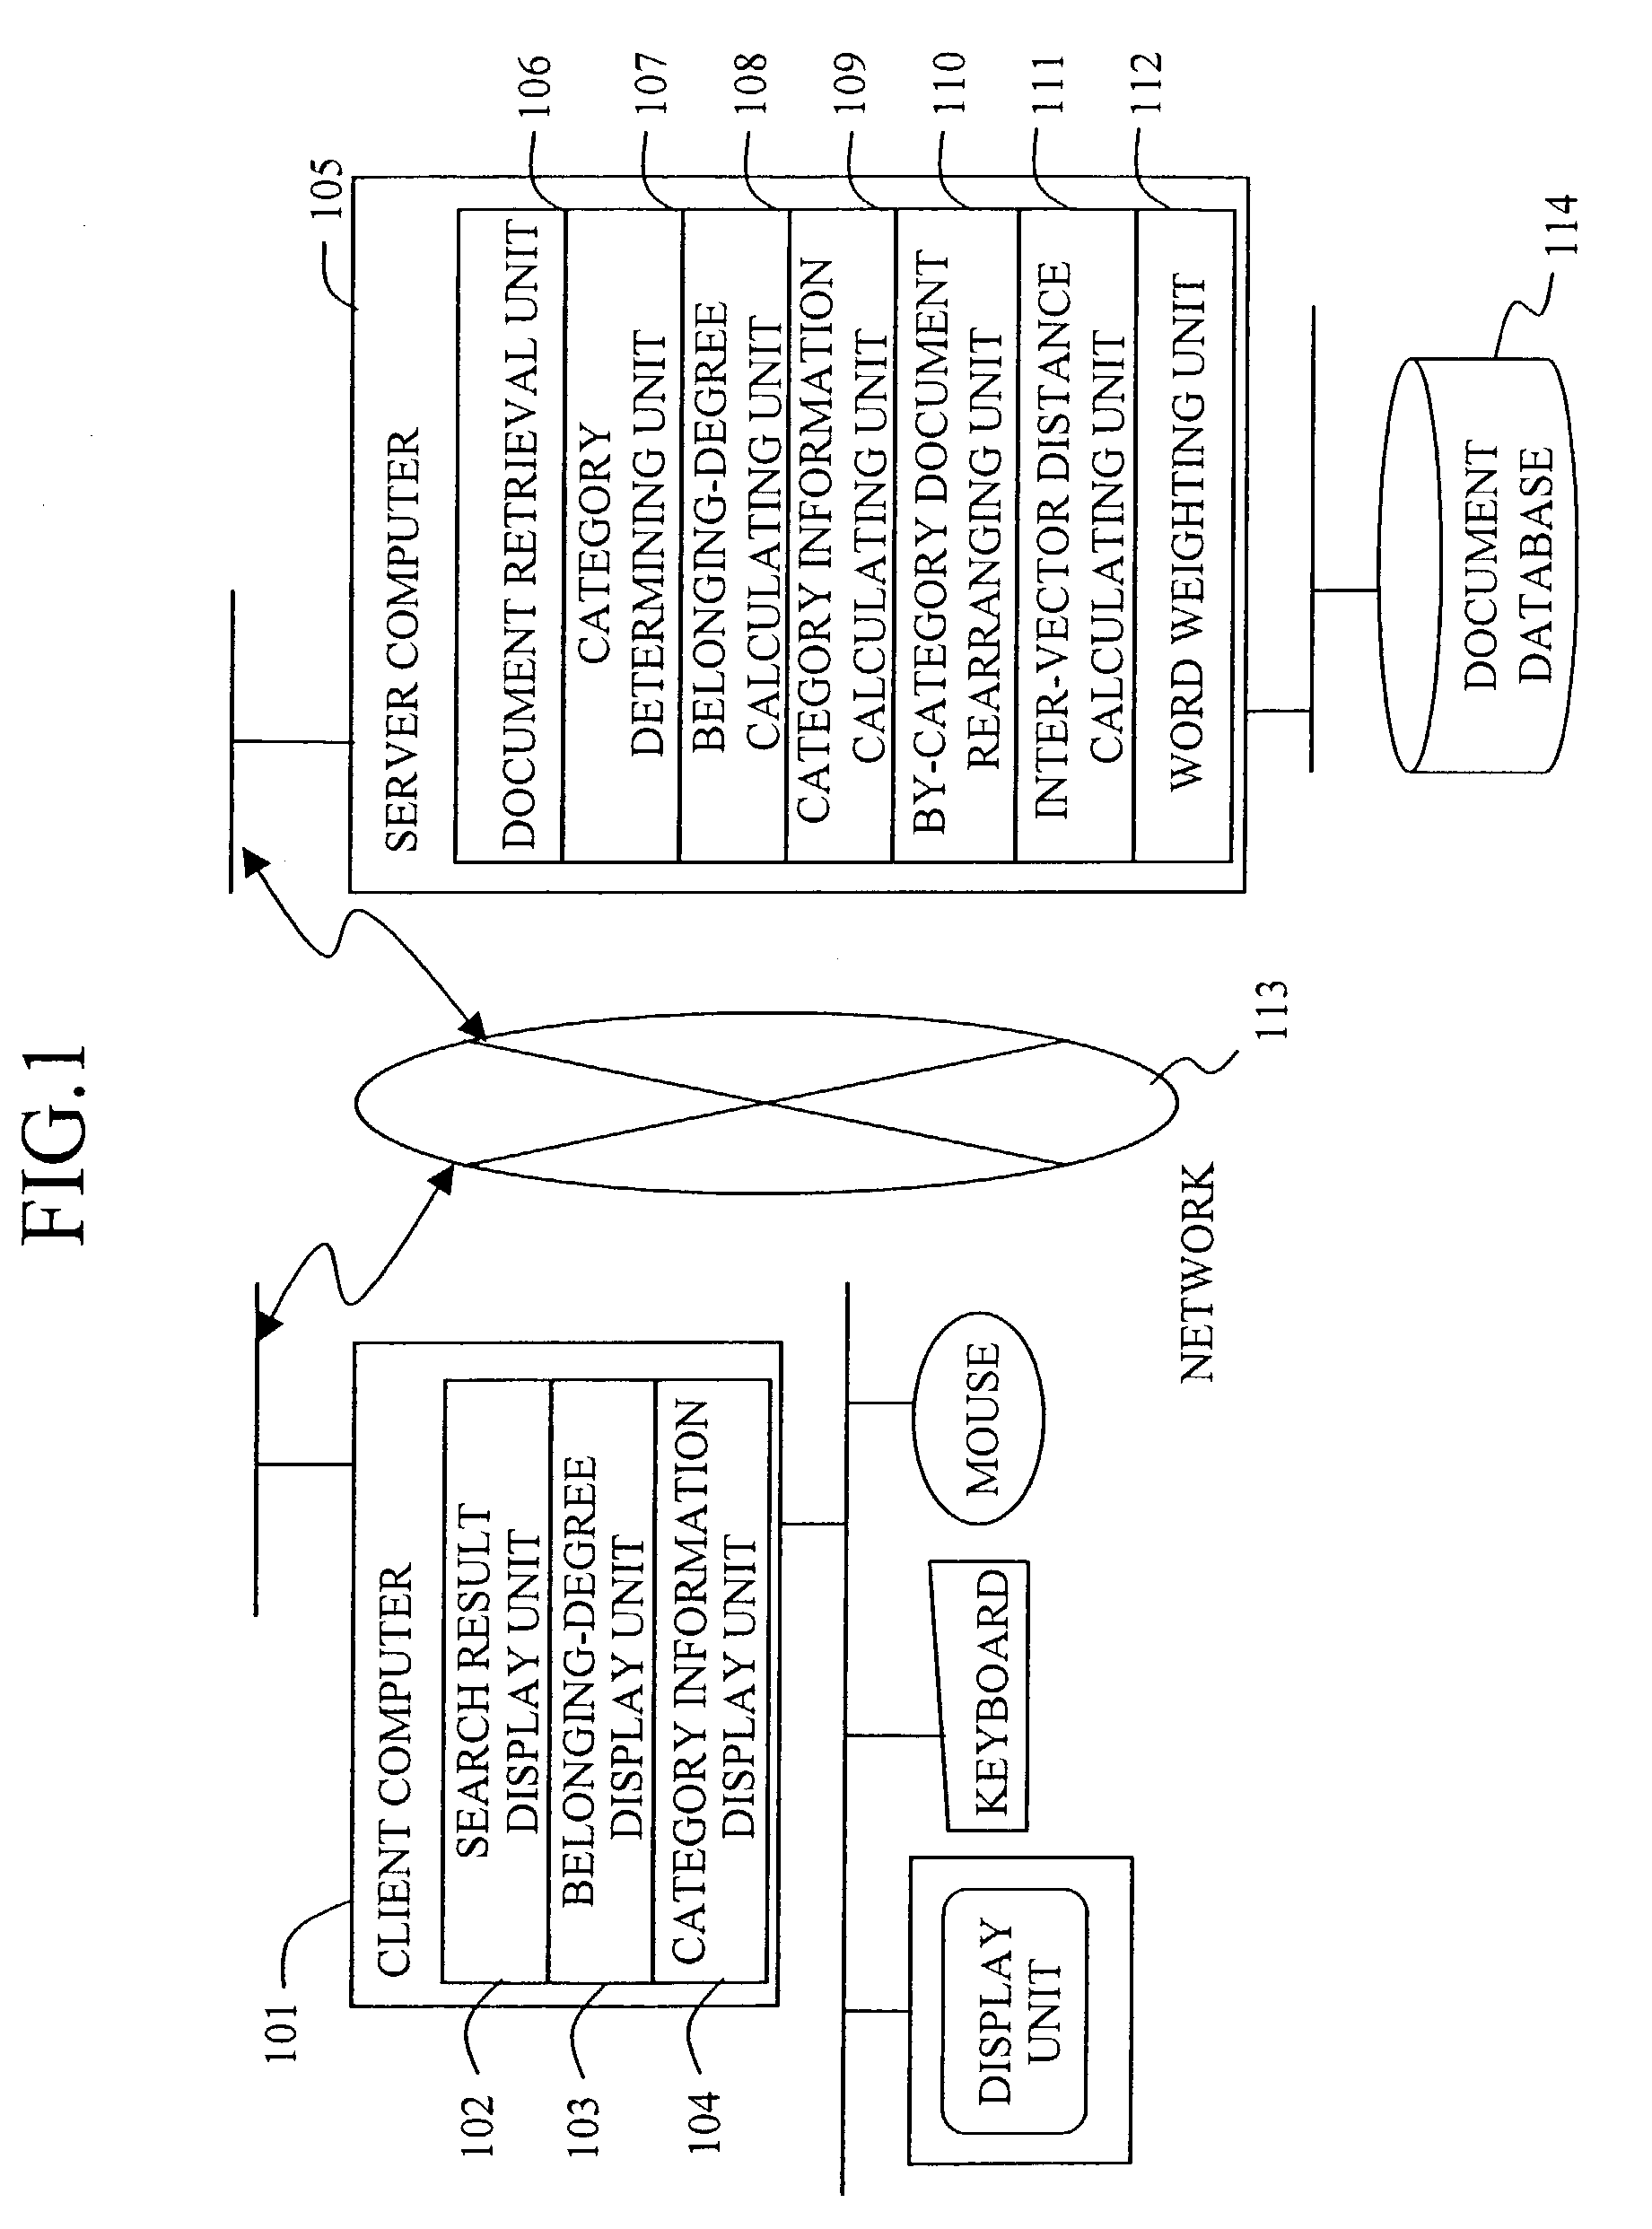 Document search method and system, and document search result display system